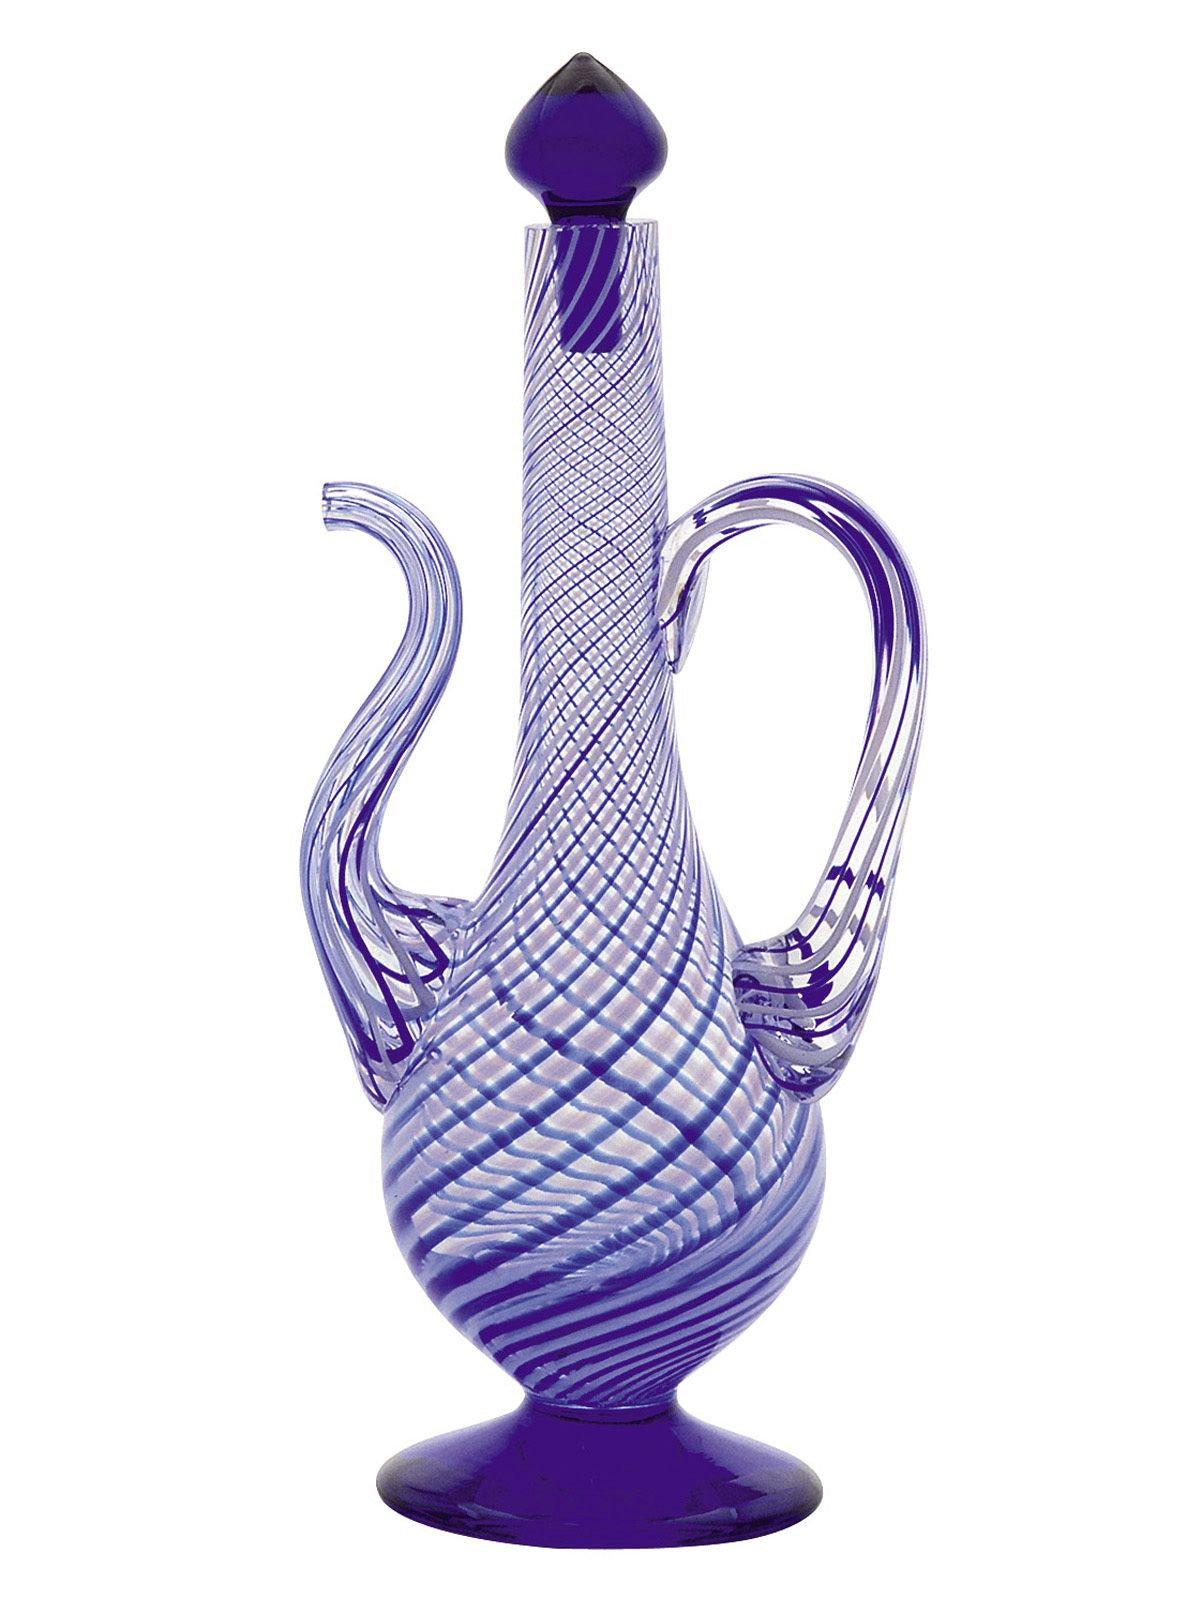 24 Best Glass Vases wholesale In Los Angeles 2024 free download glass vases wholesale in los angeles of ac287eac29fm i bac2bclbac2bcl abrikturkish glass art ornamental glass pertaining to ac287eac29fm i bac2bclbac2bcl abrikturkish glass art